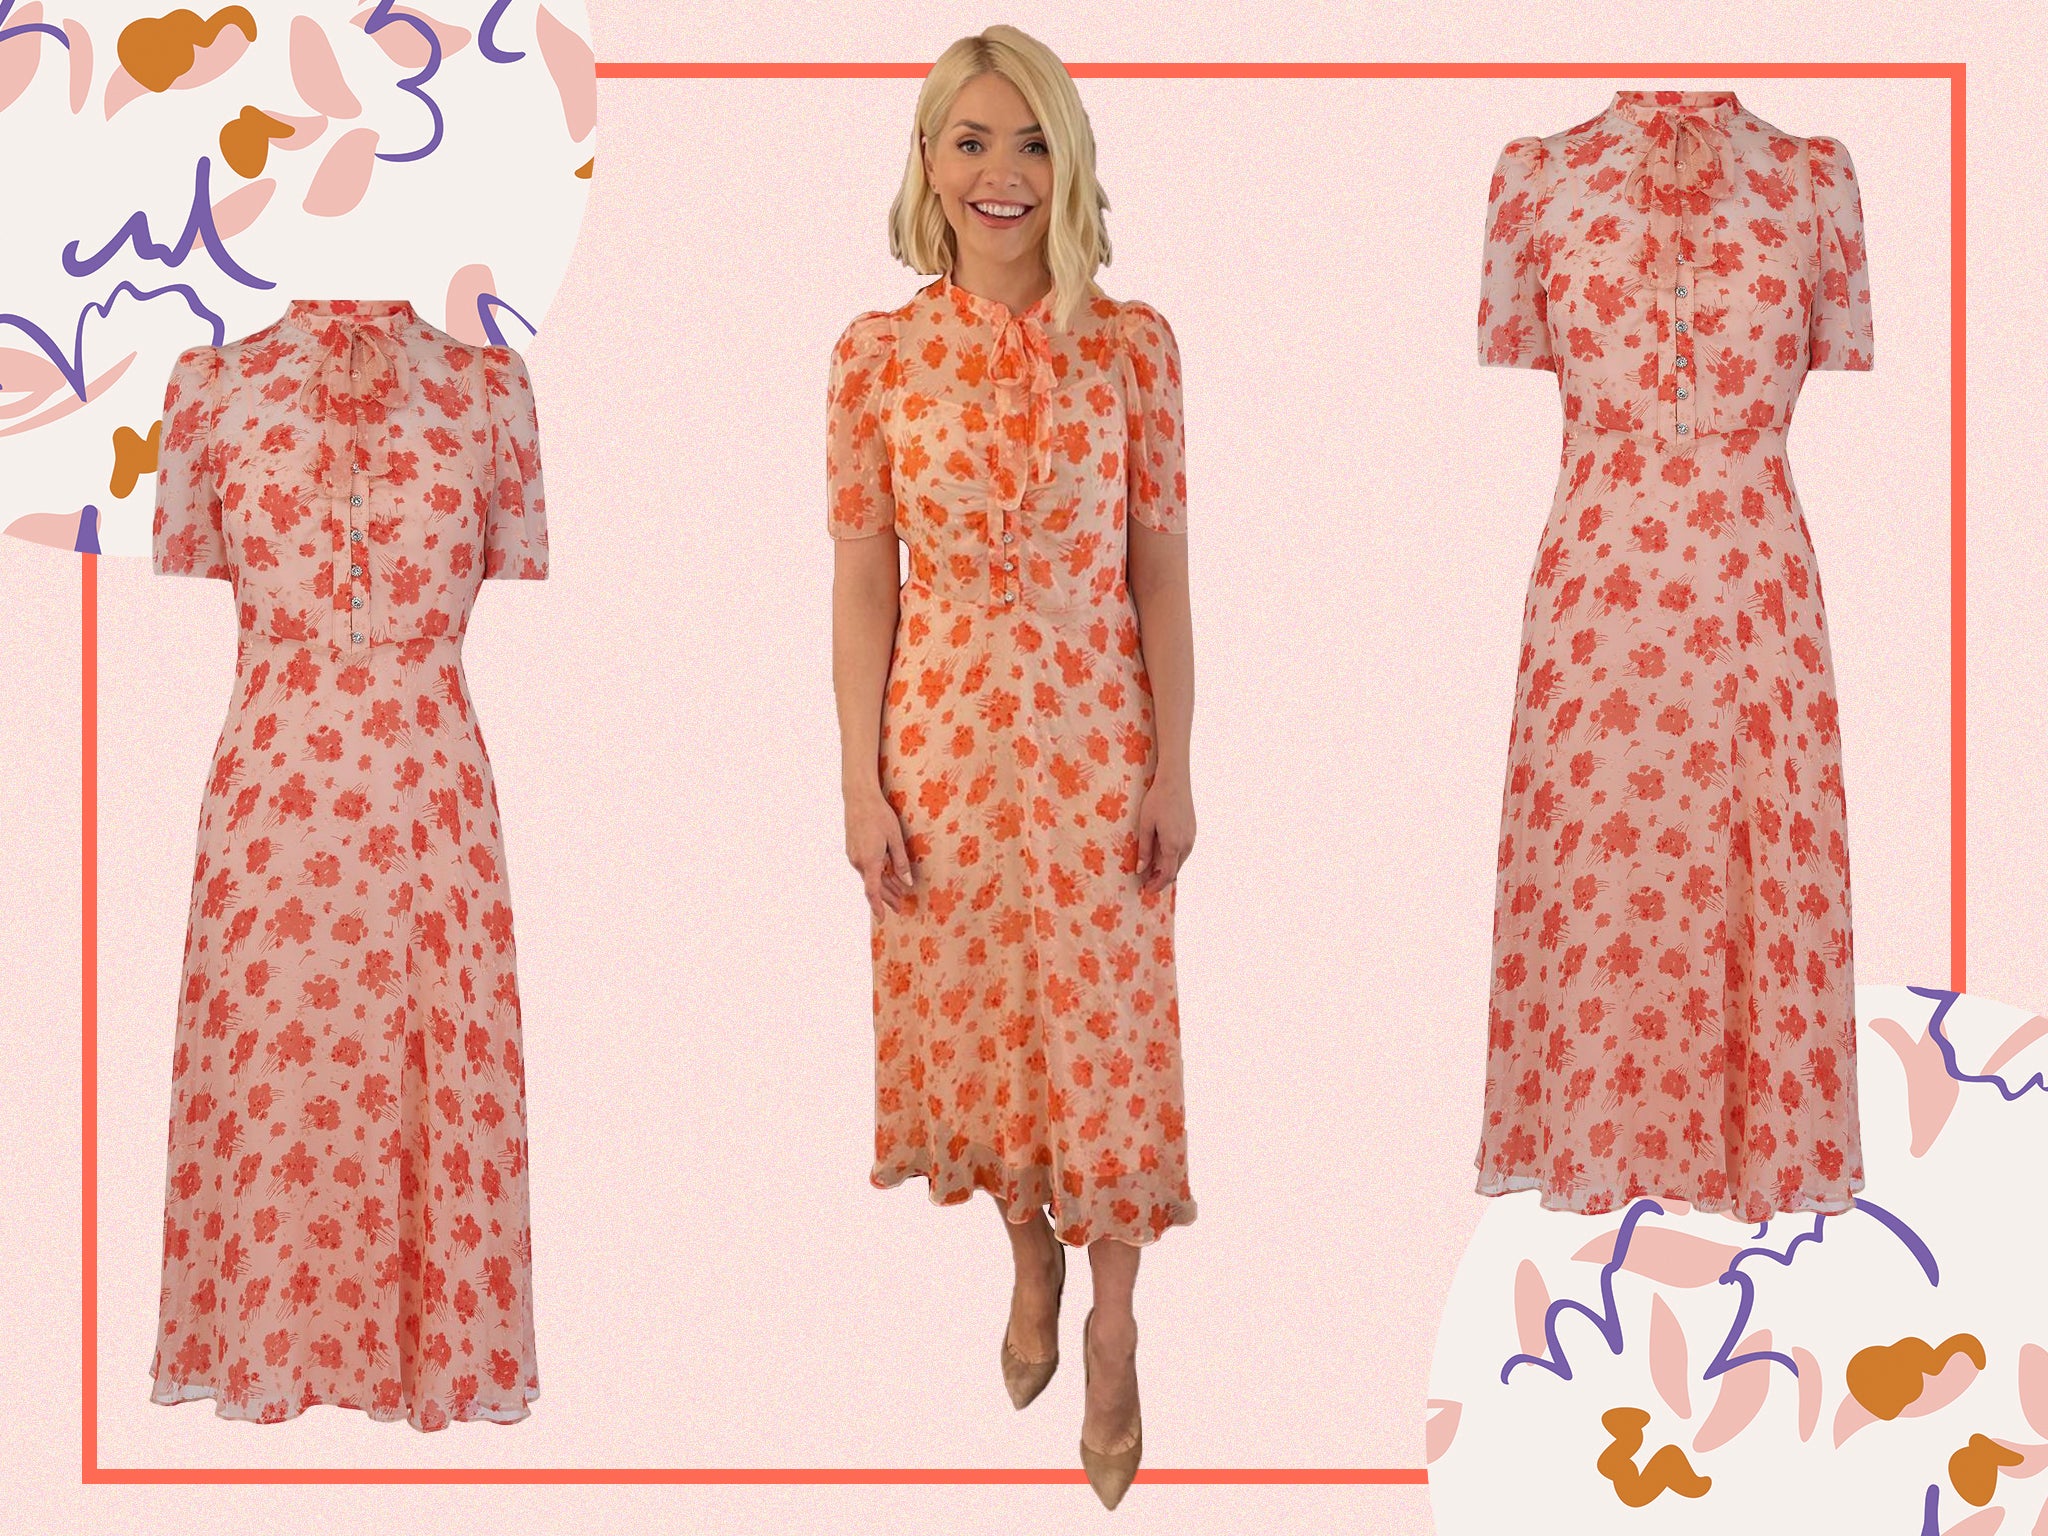 Florals for spring may not be groundbreaking, but Holly sure makes them look good